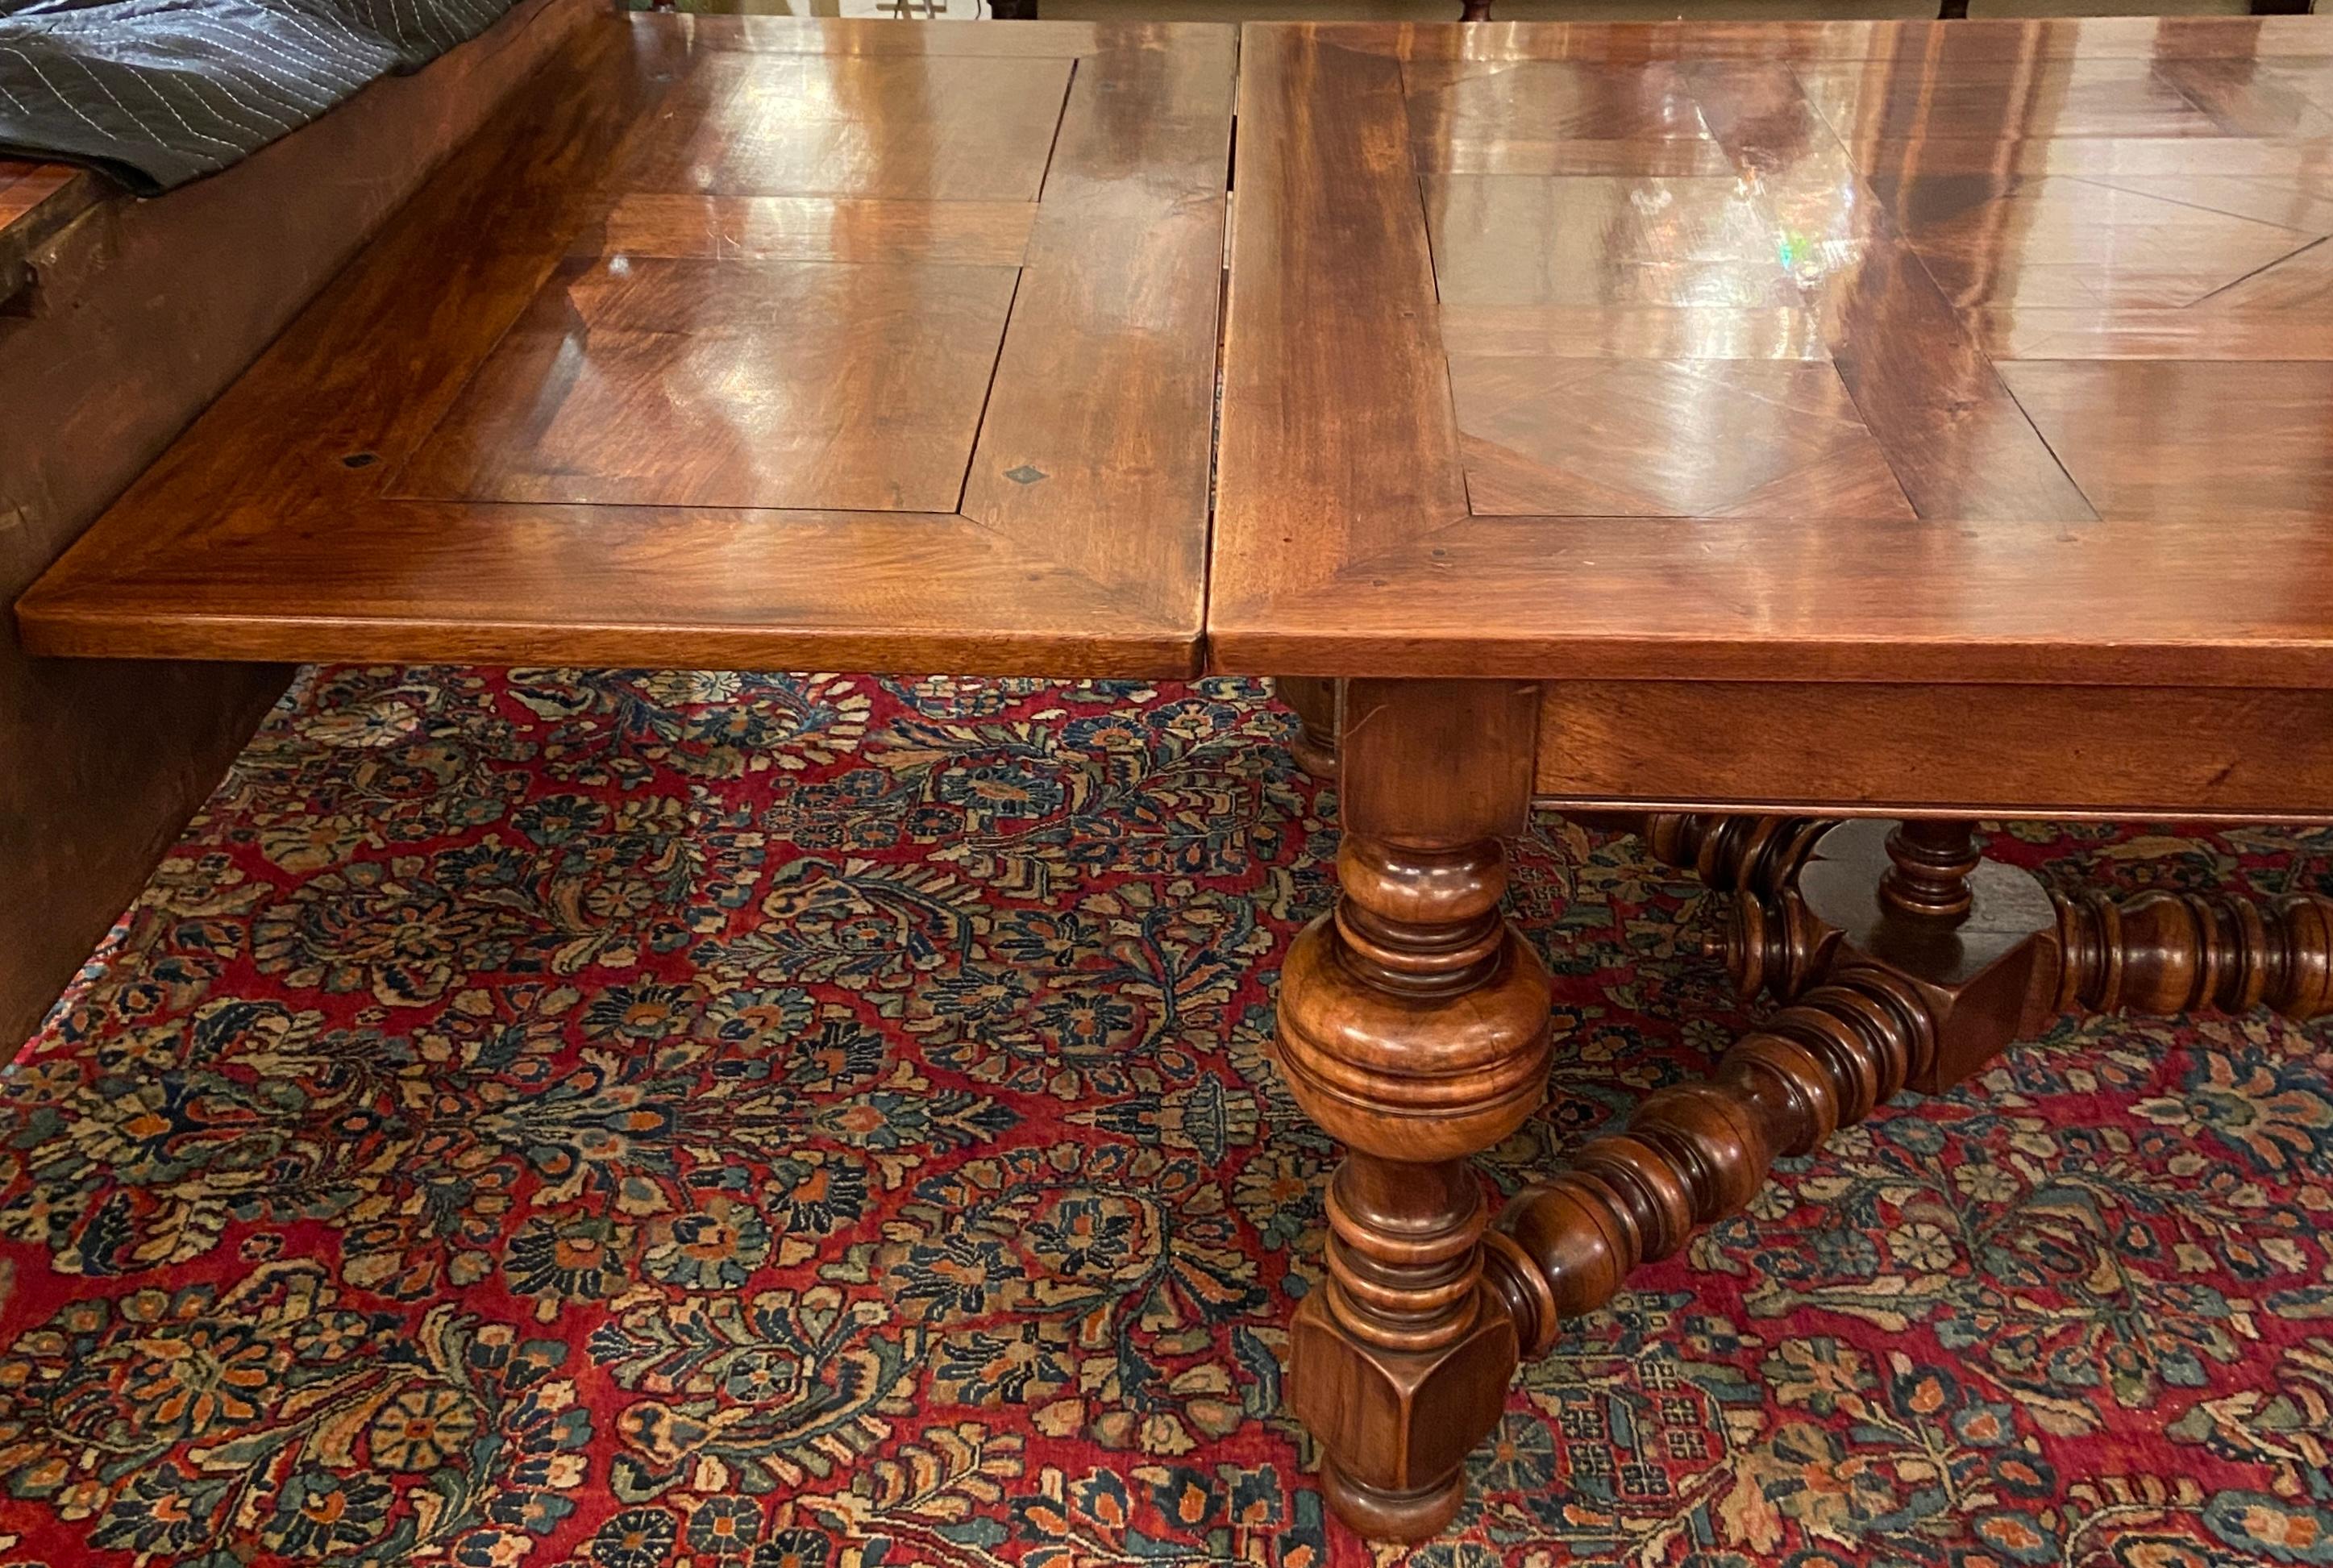 Antique 19th century French Francois Premier carved walnut drawleaf dining table.
Measures: Height: 30 inches 
Width: 83 inches (132 inches extended) 
Depth: 50 inches.